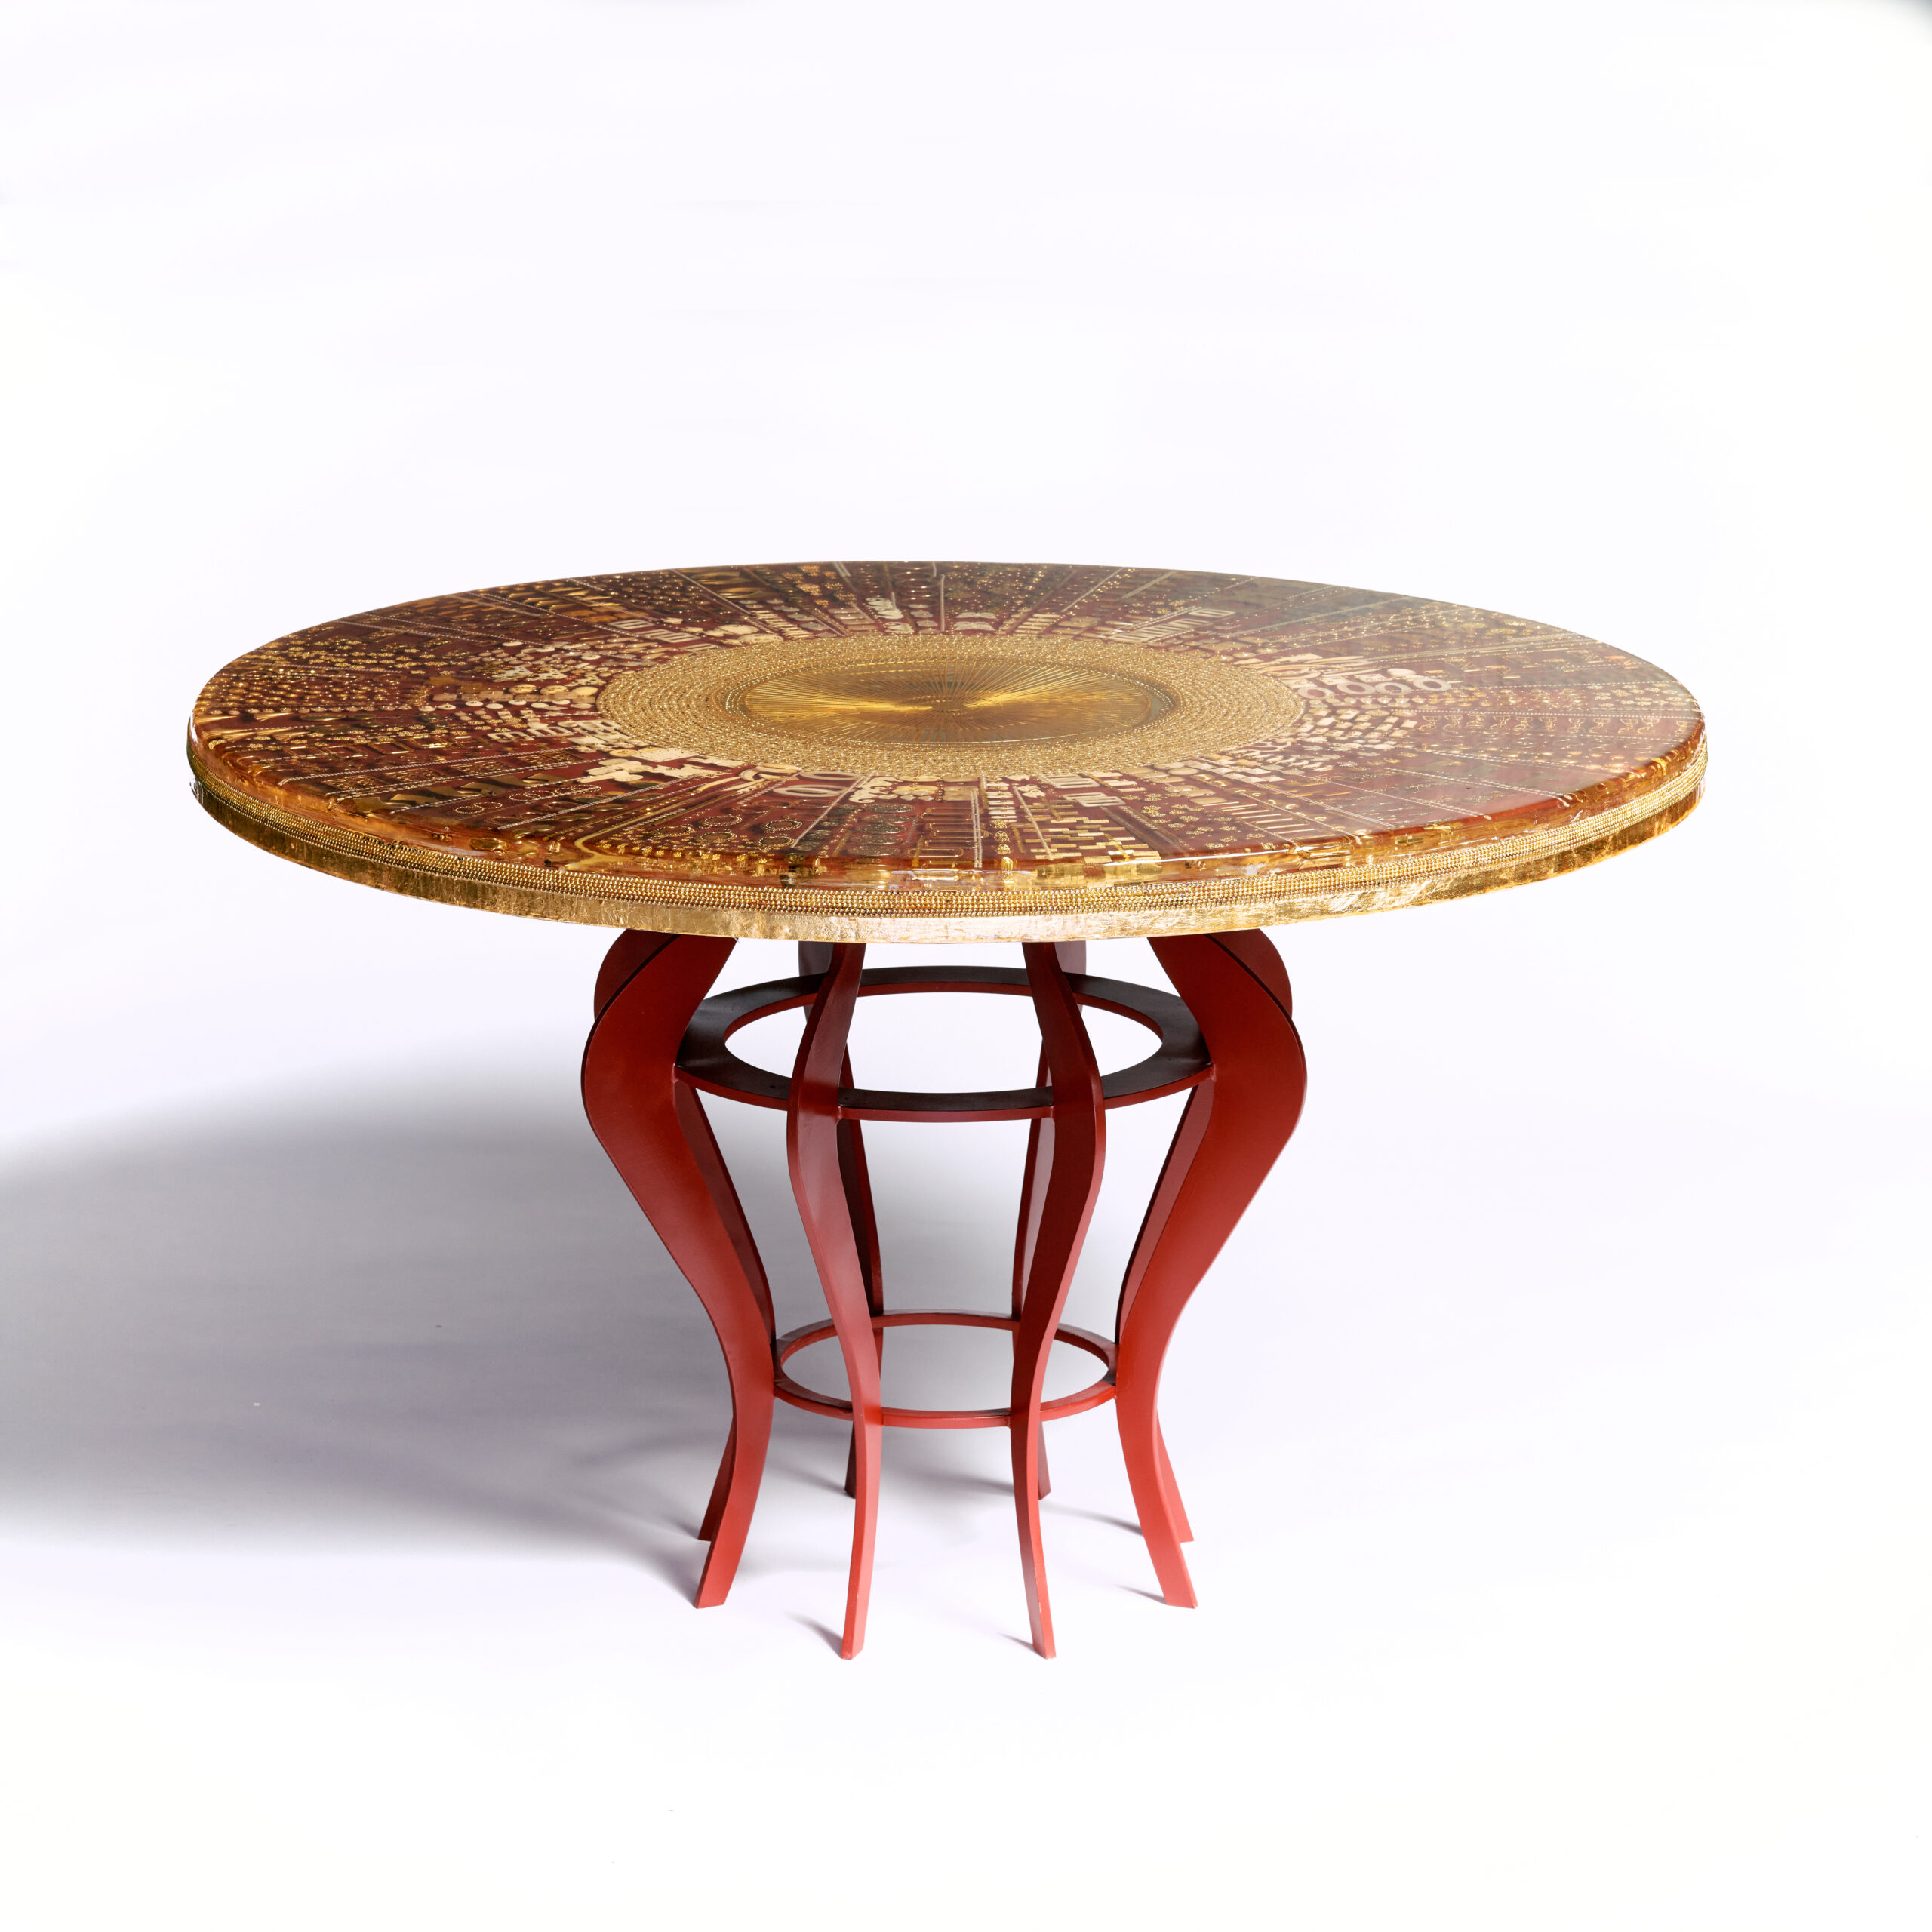 Manu Crotti Resin and Lacquer Table